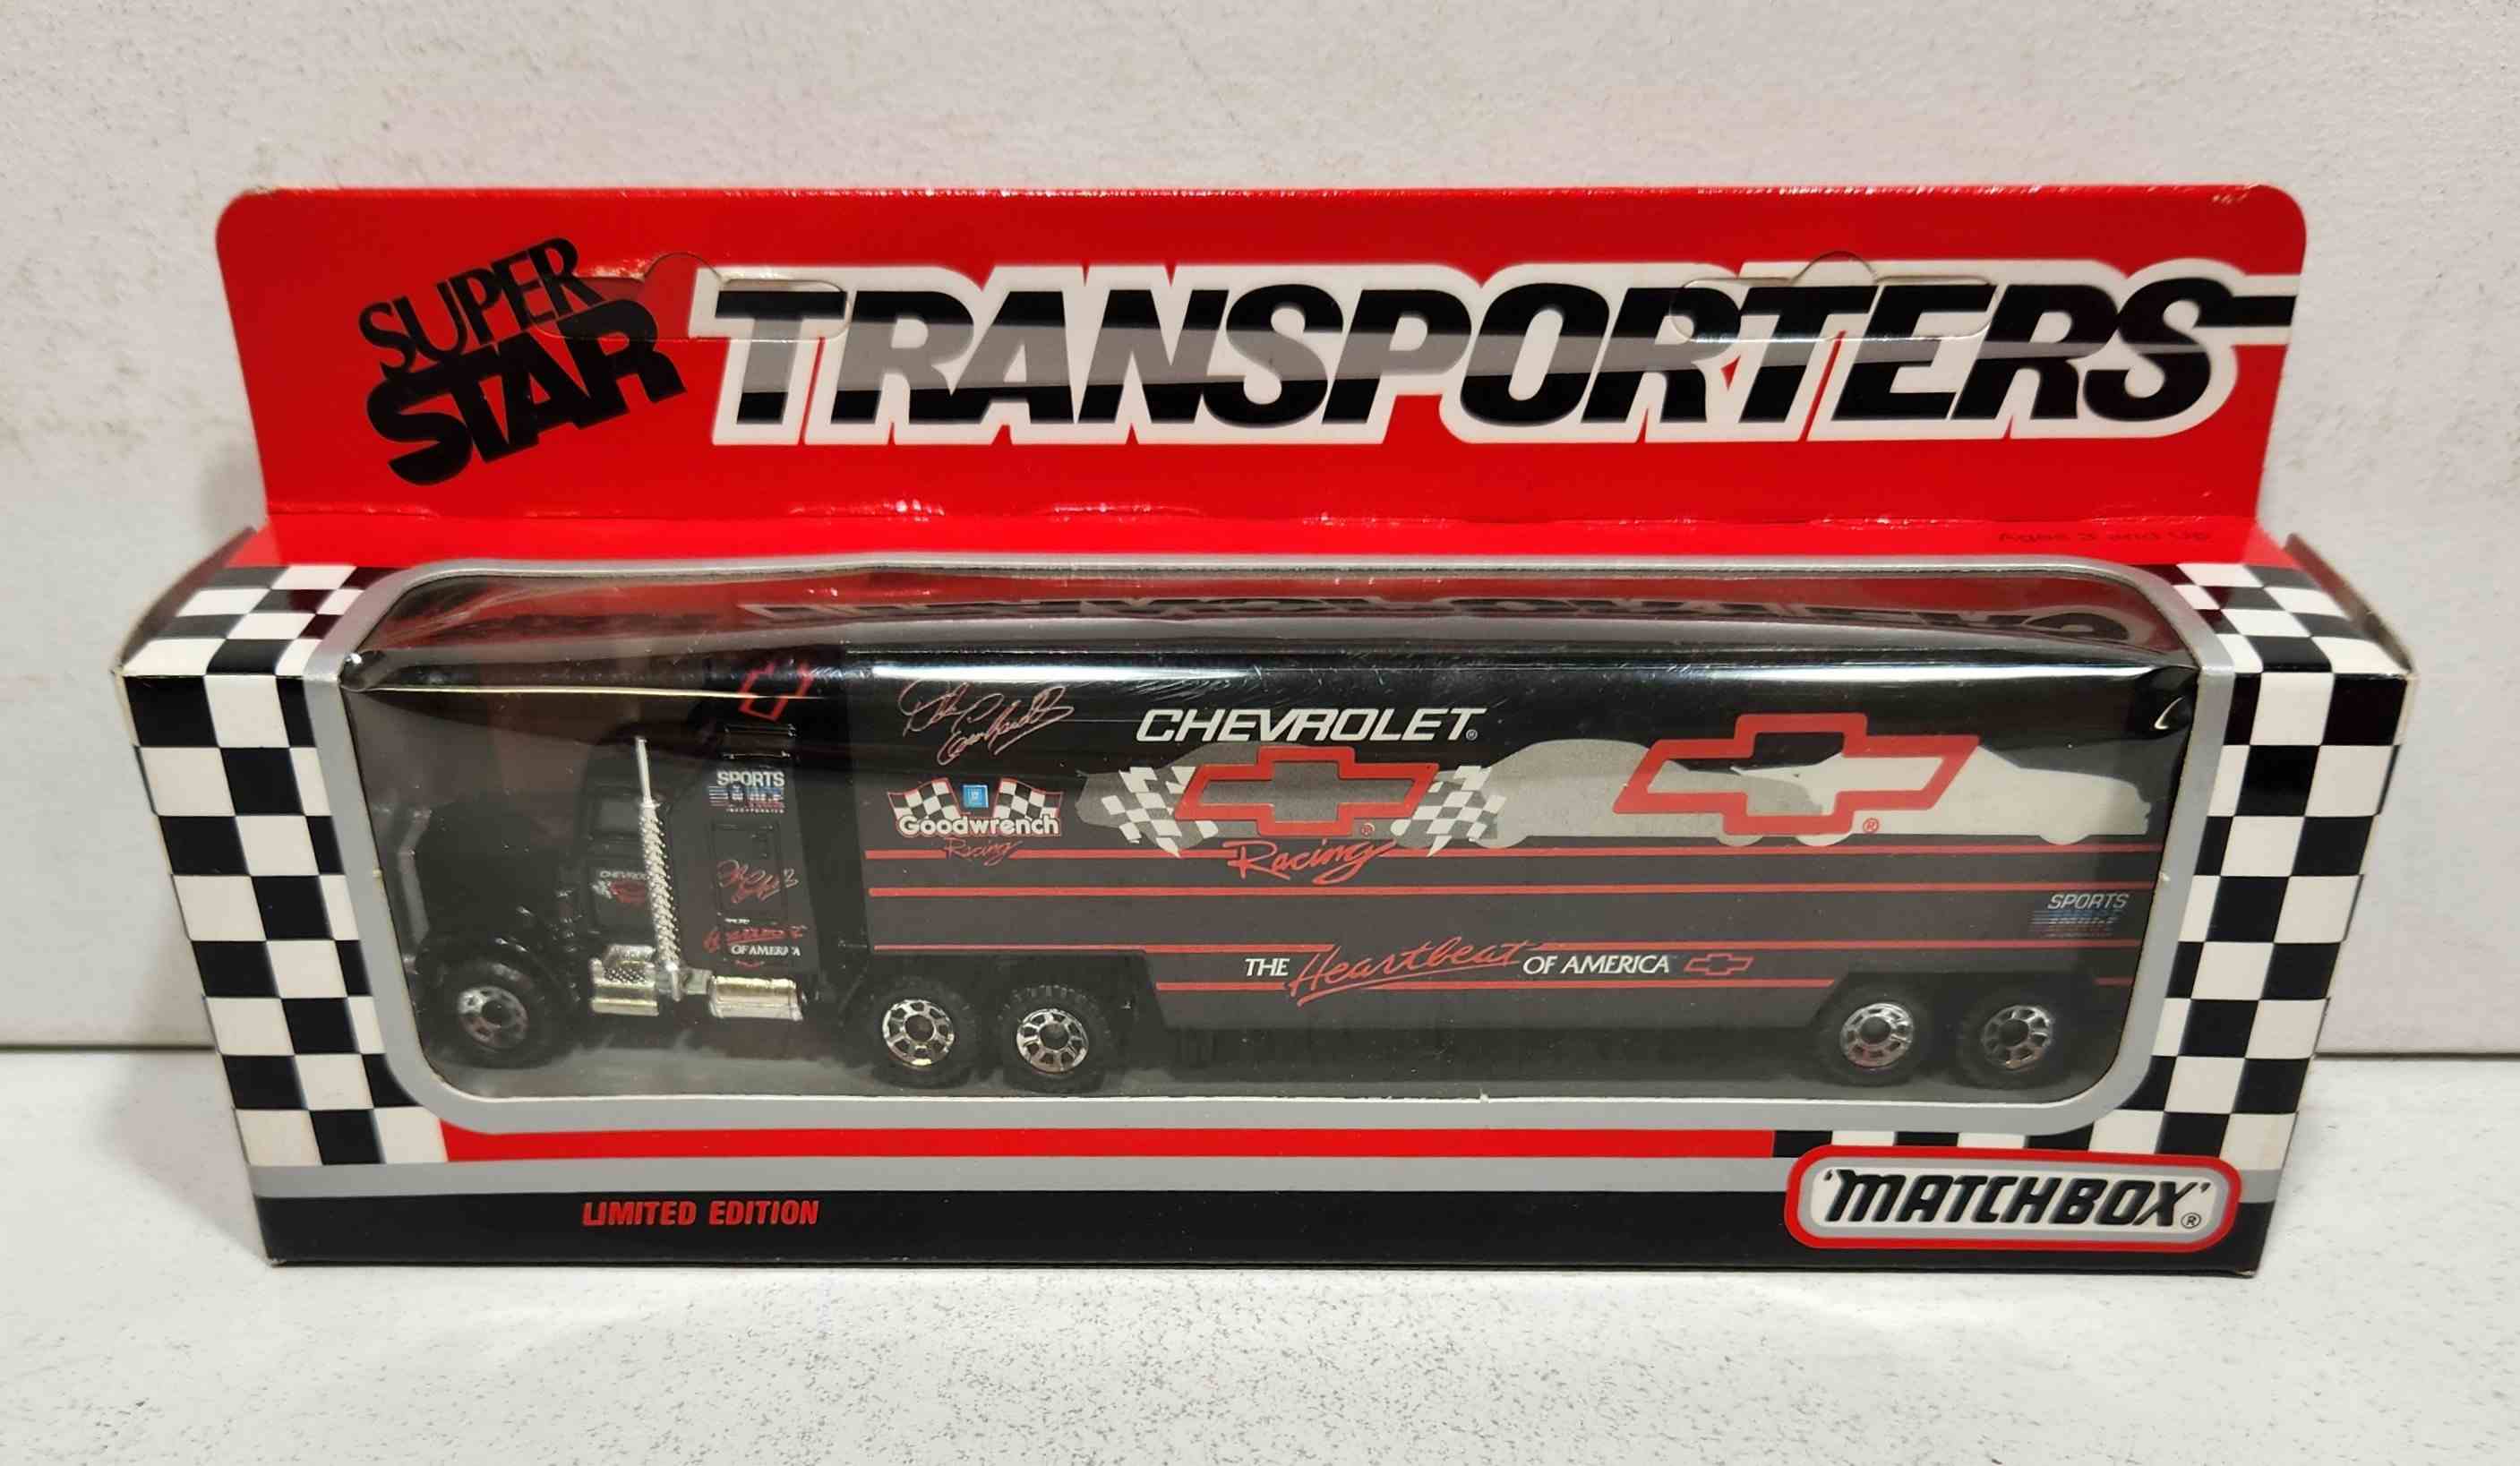 1993 Dale Earnhardt 1/87th Chevy Bow Tie Transporter